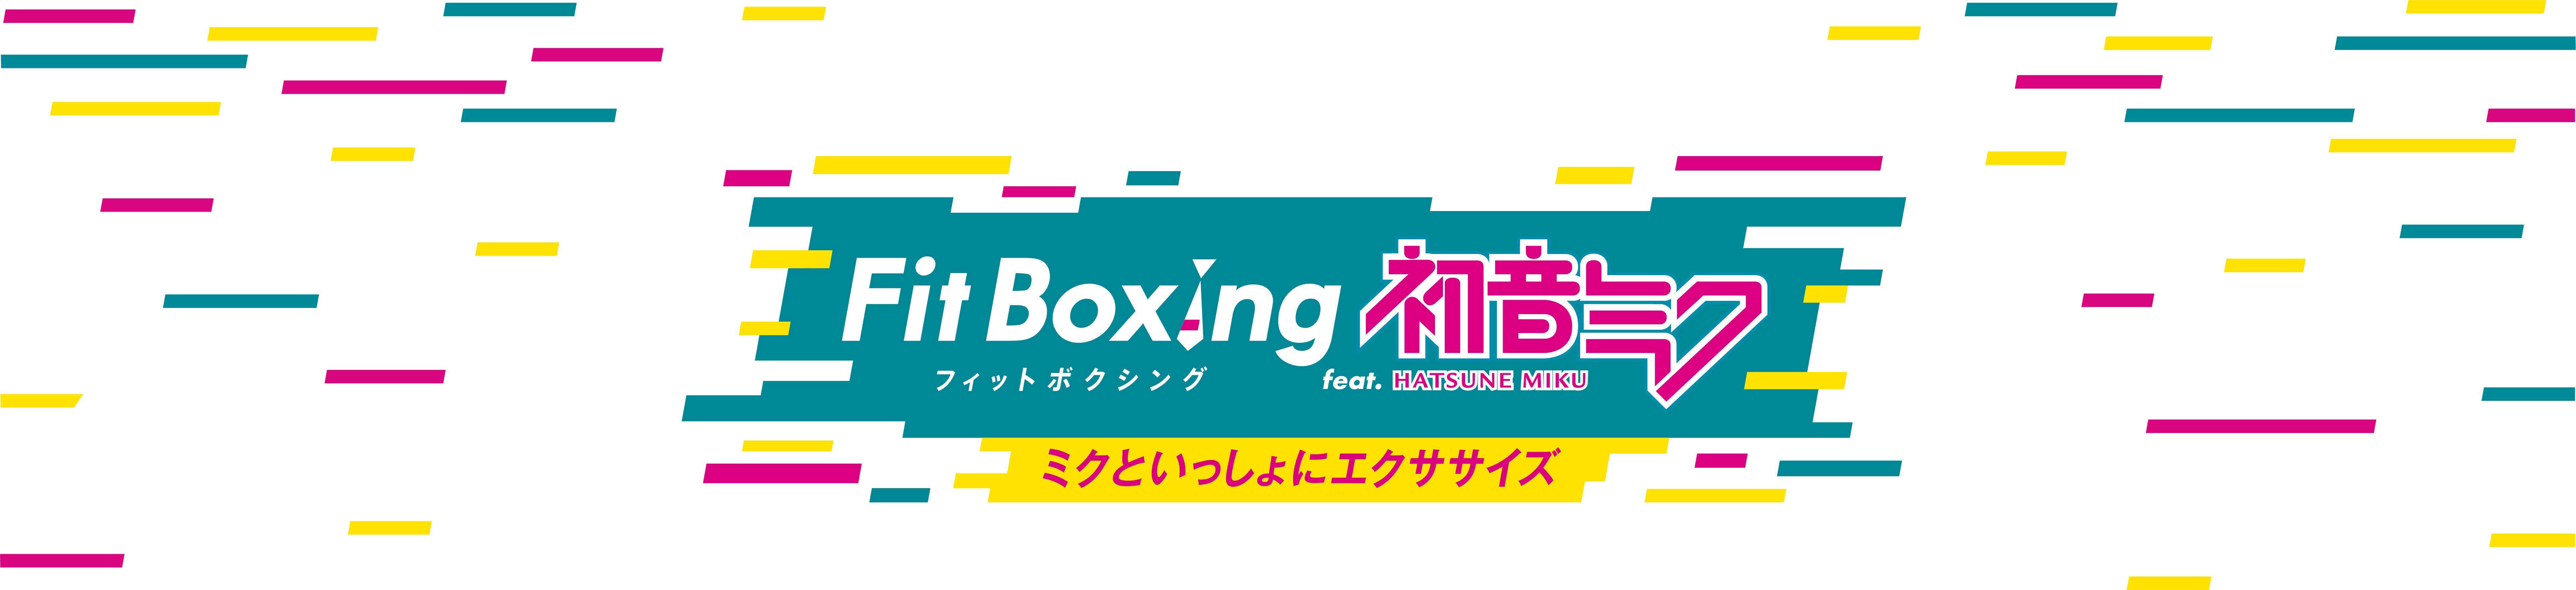 Fit Boxing feat.初音ミク